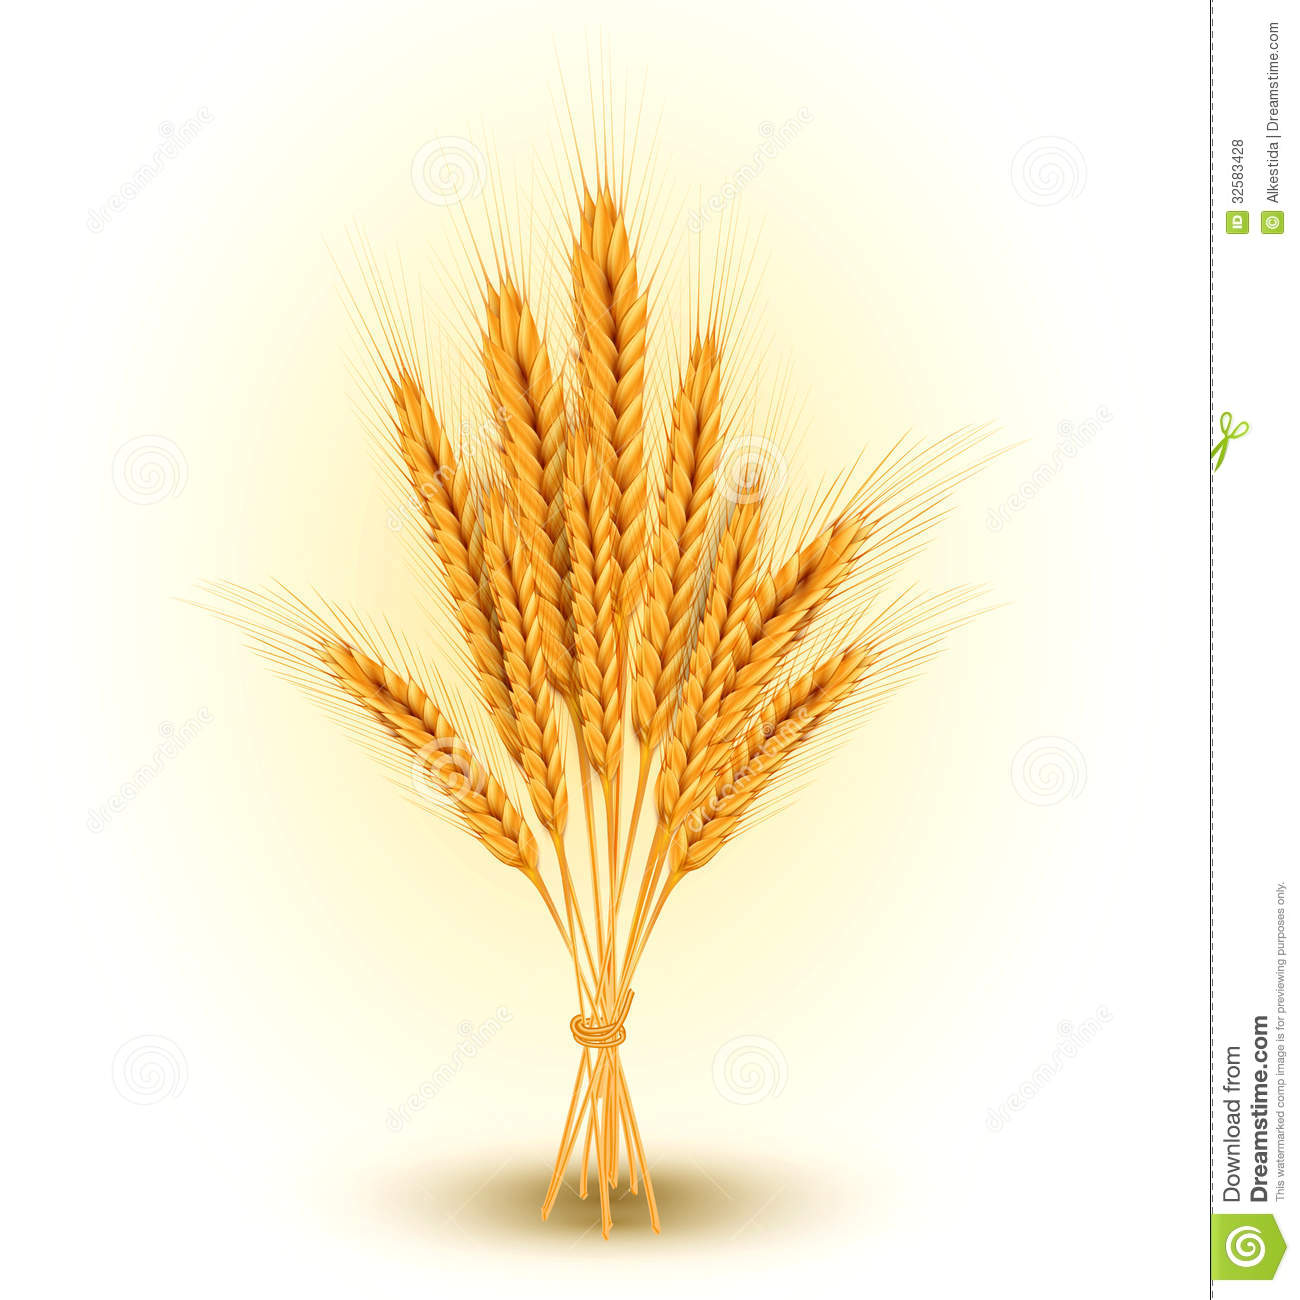 Vector Background With A Sheaf Of Golden Wheat Ear Royalty Free Stock